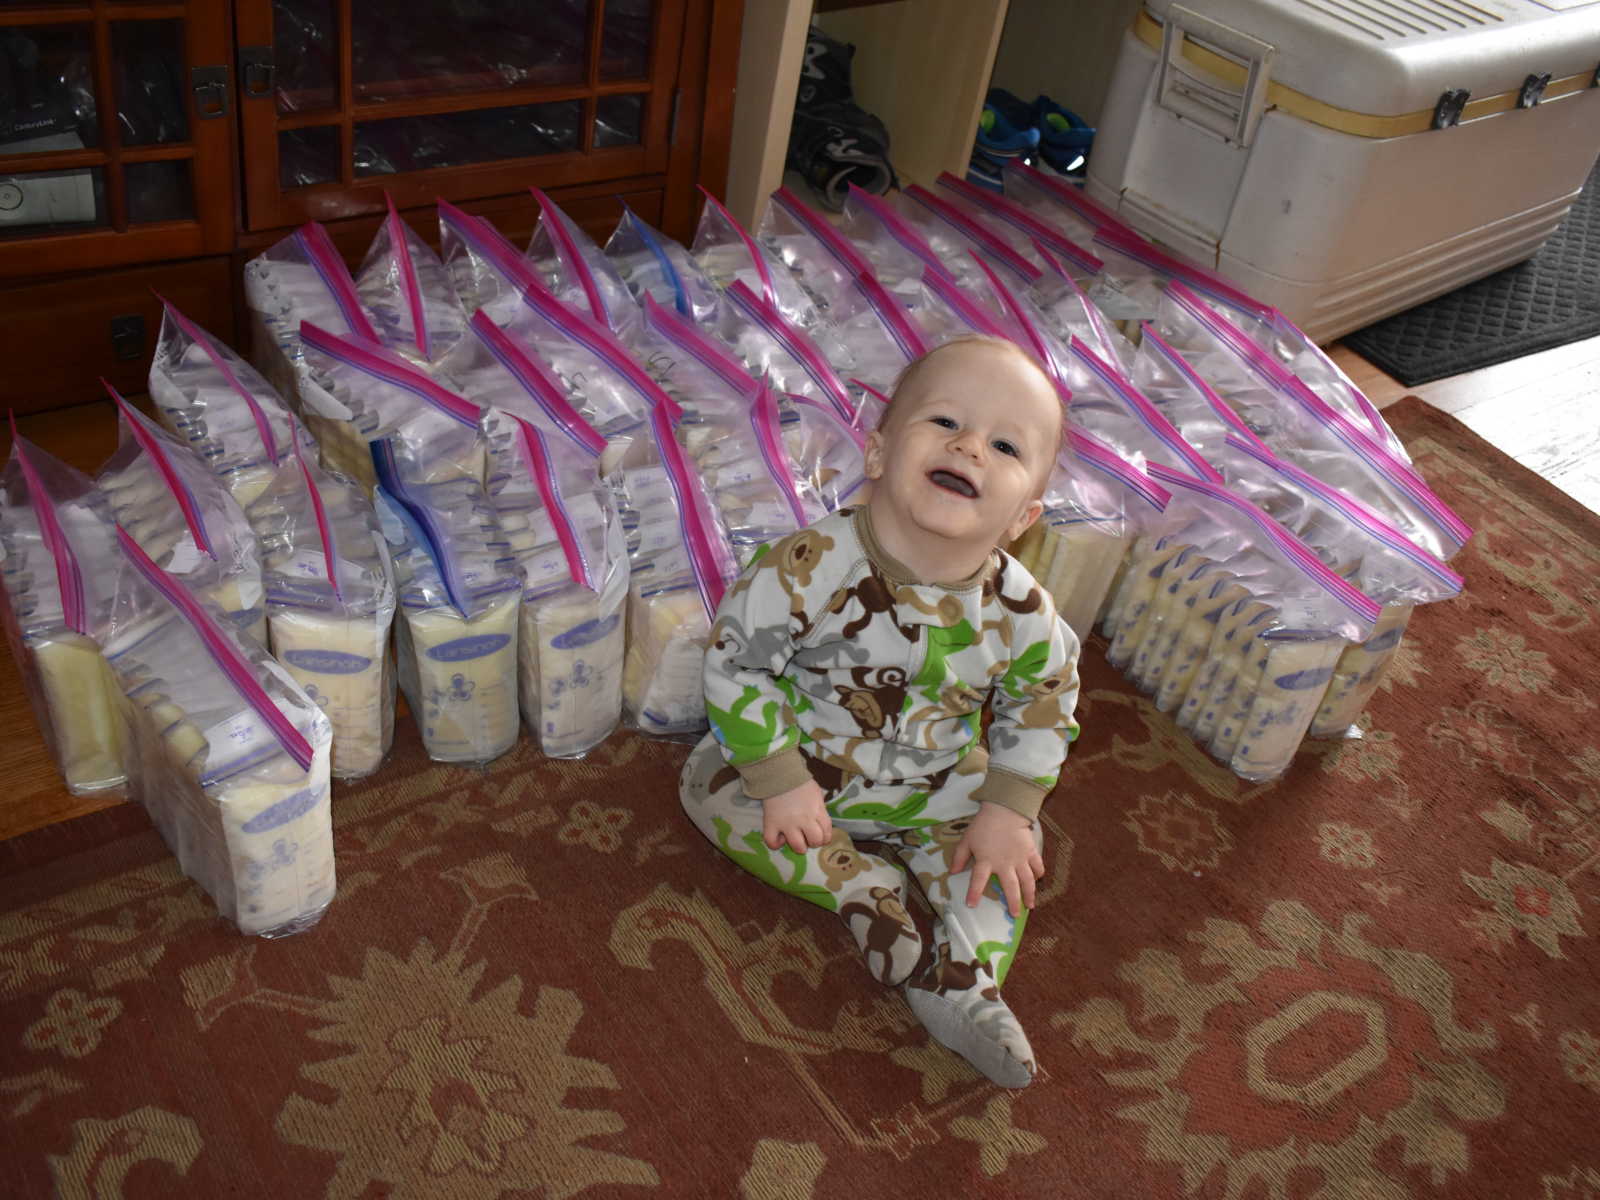 Baby boy sitting on ground smiling in front of rows of Ziploc bags of breast milk his mother was donating